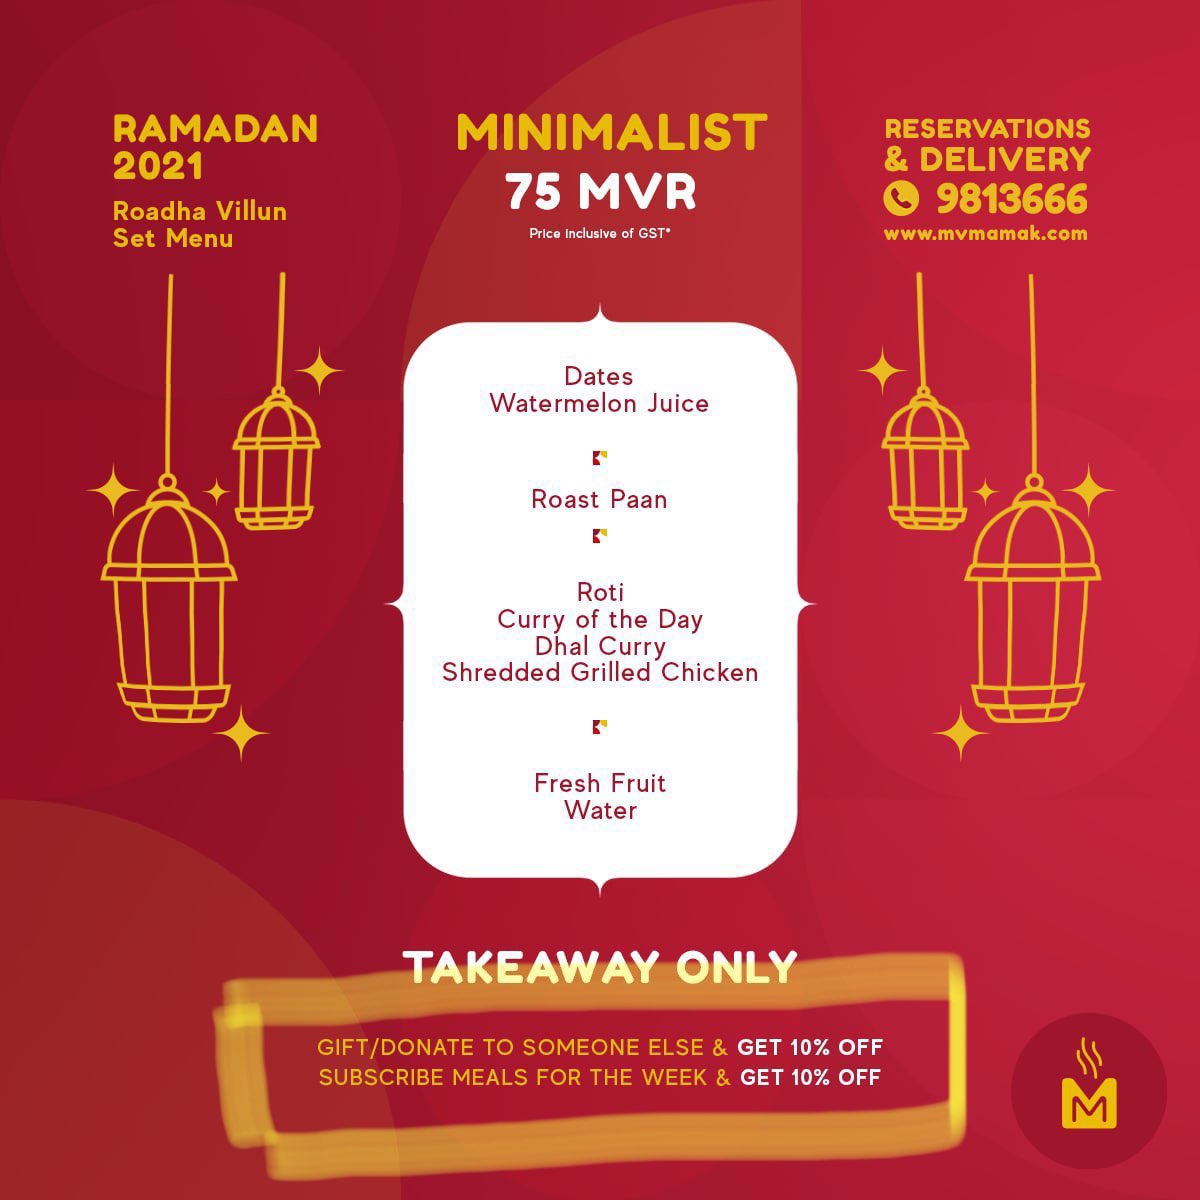 You can gift/donate  @MvMamak ‘s minimalist Ramadan Iftar pack to someone in need. Reach out to Mamak on Twitter for further details on how to proceed with your donations.